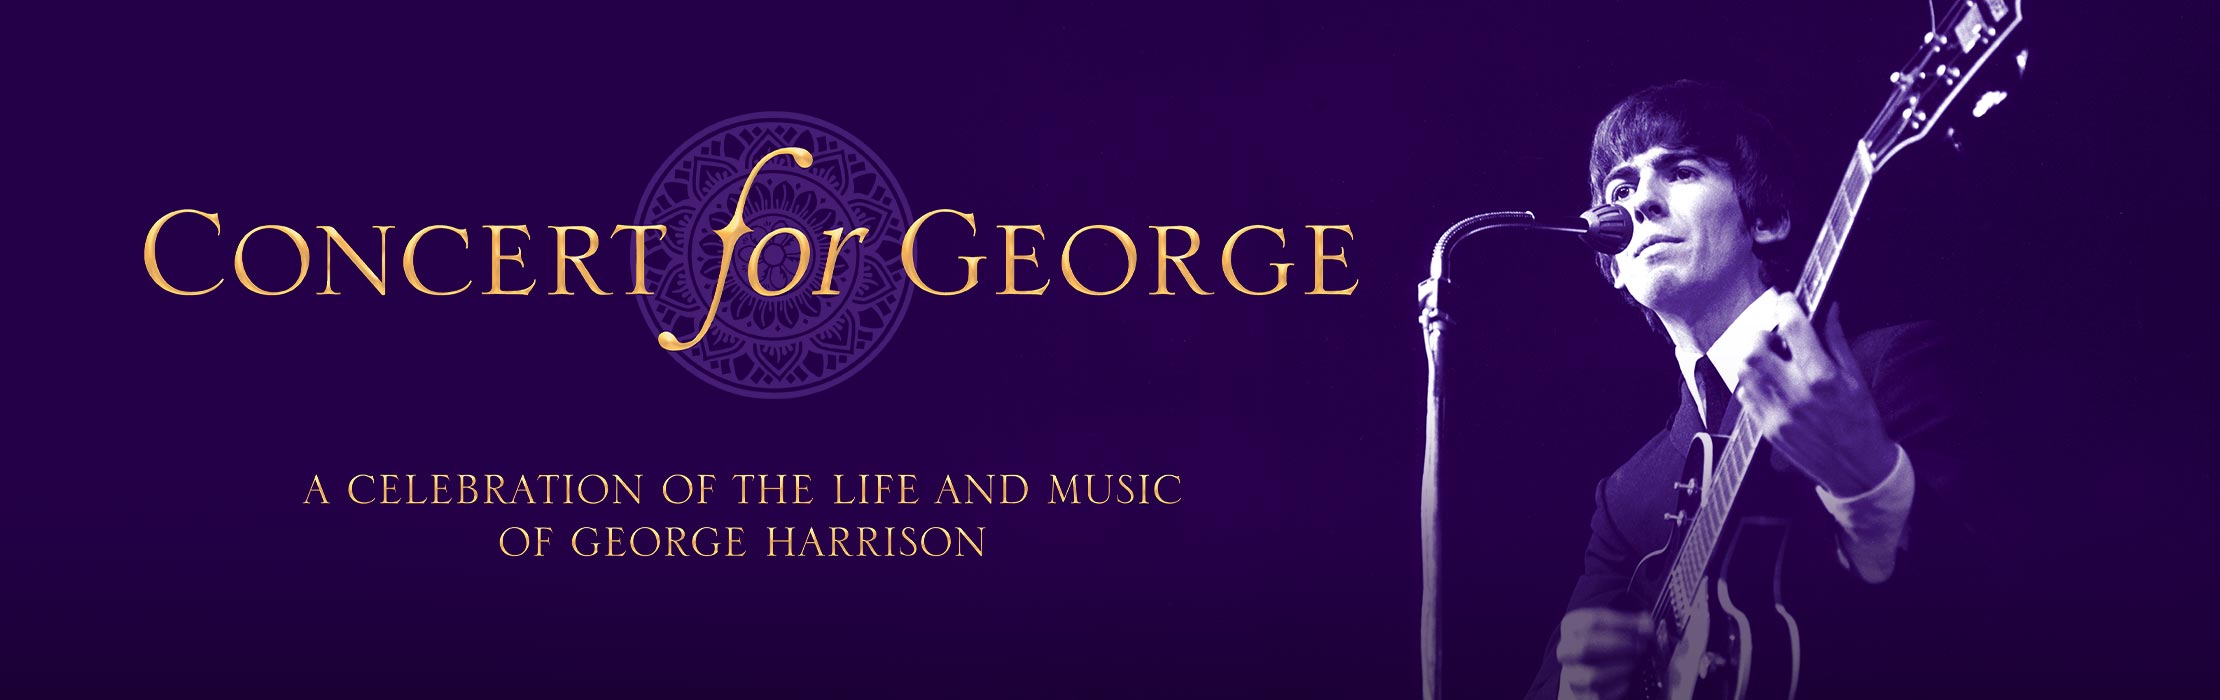 George Harrison Concert For George